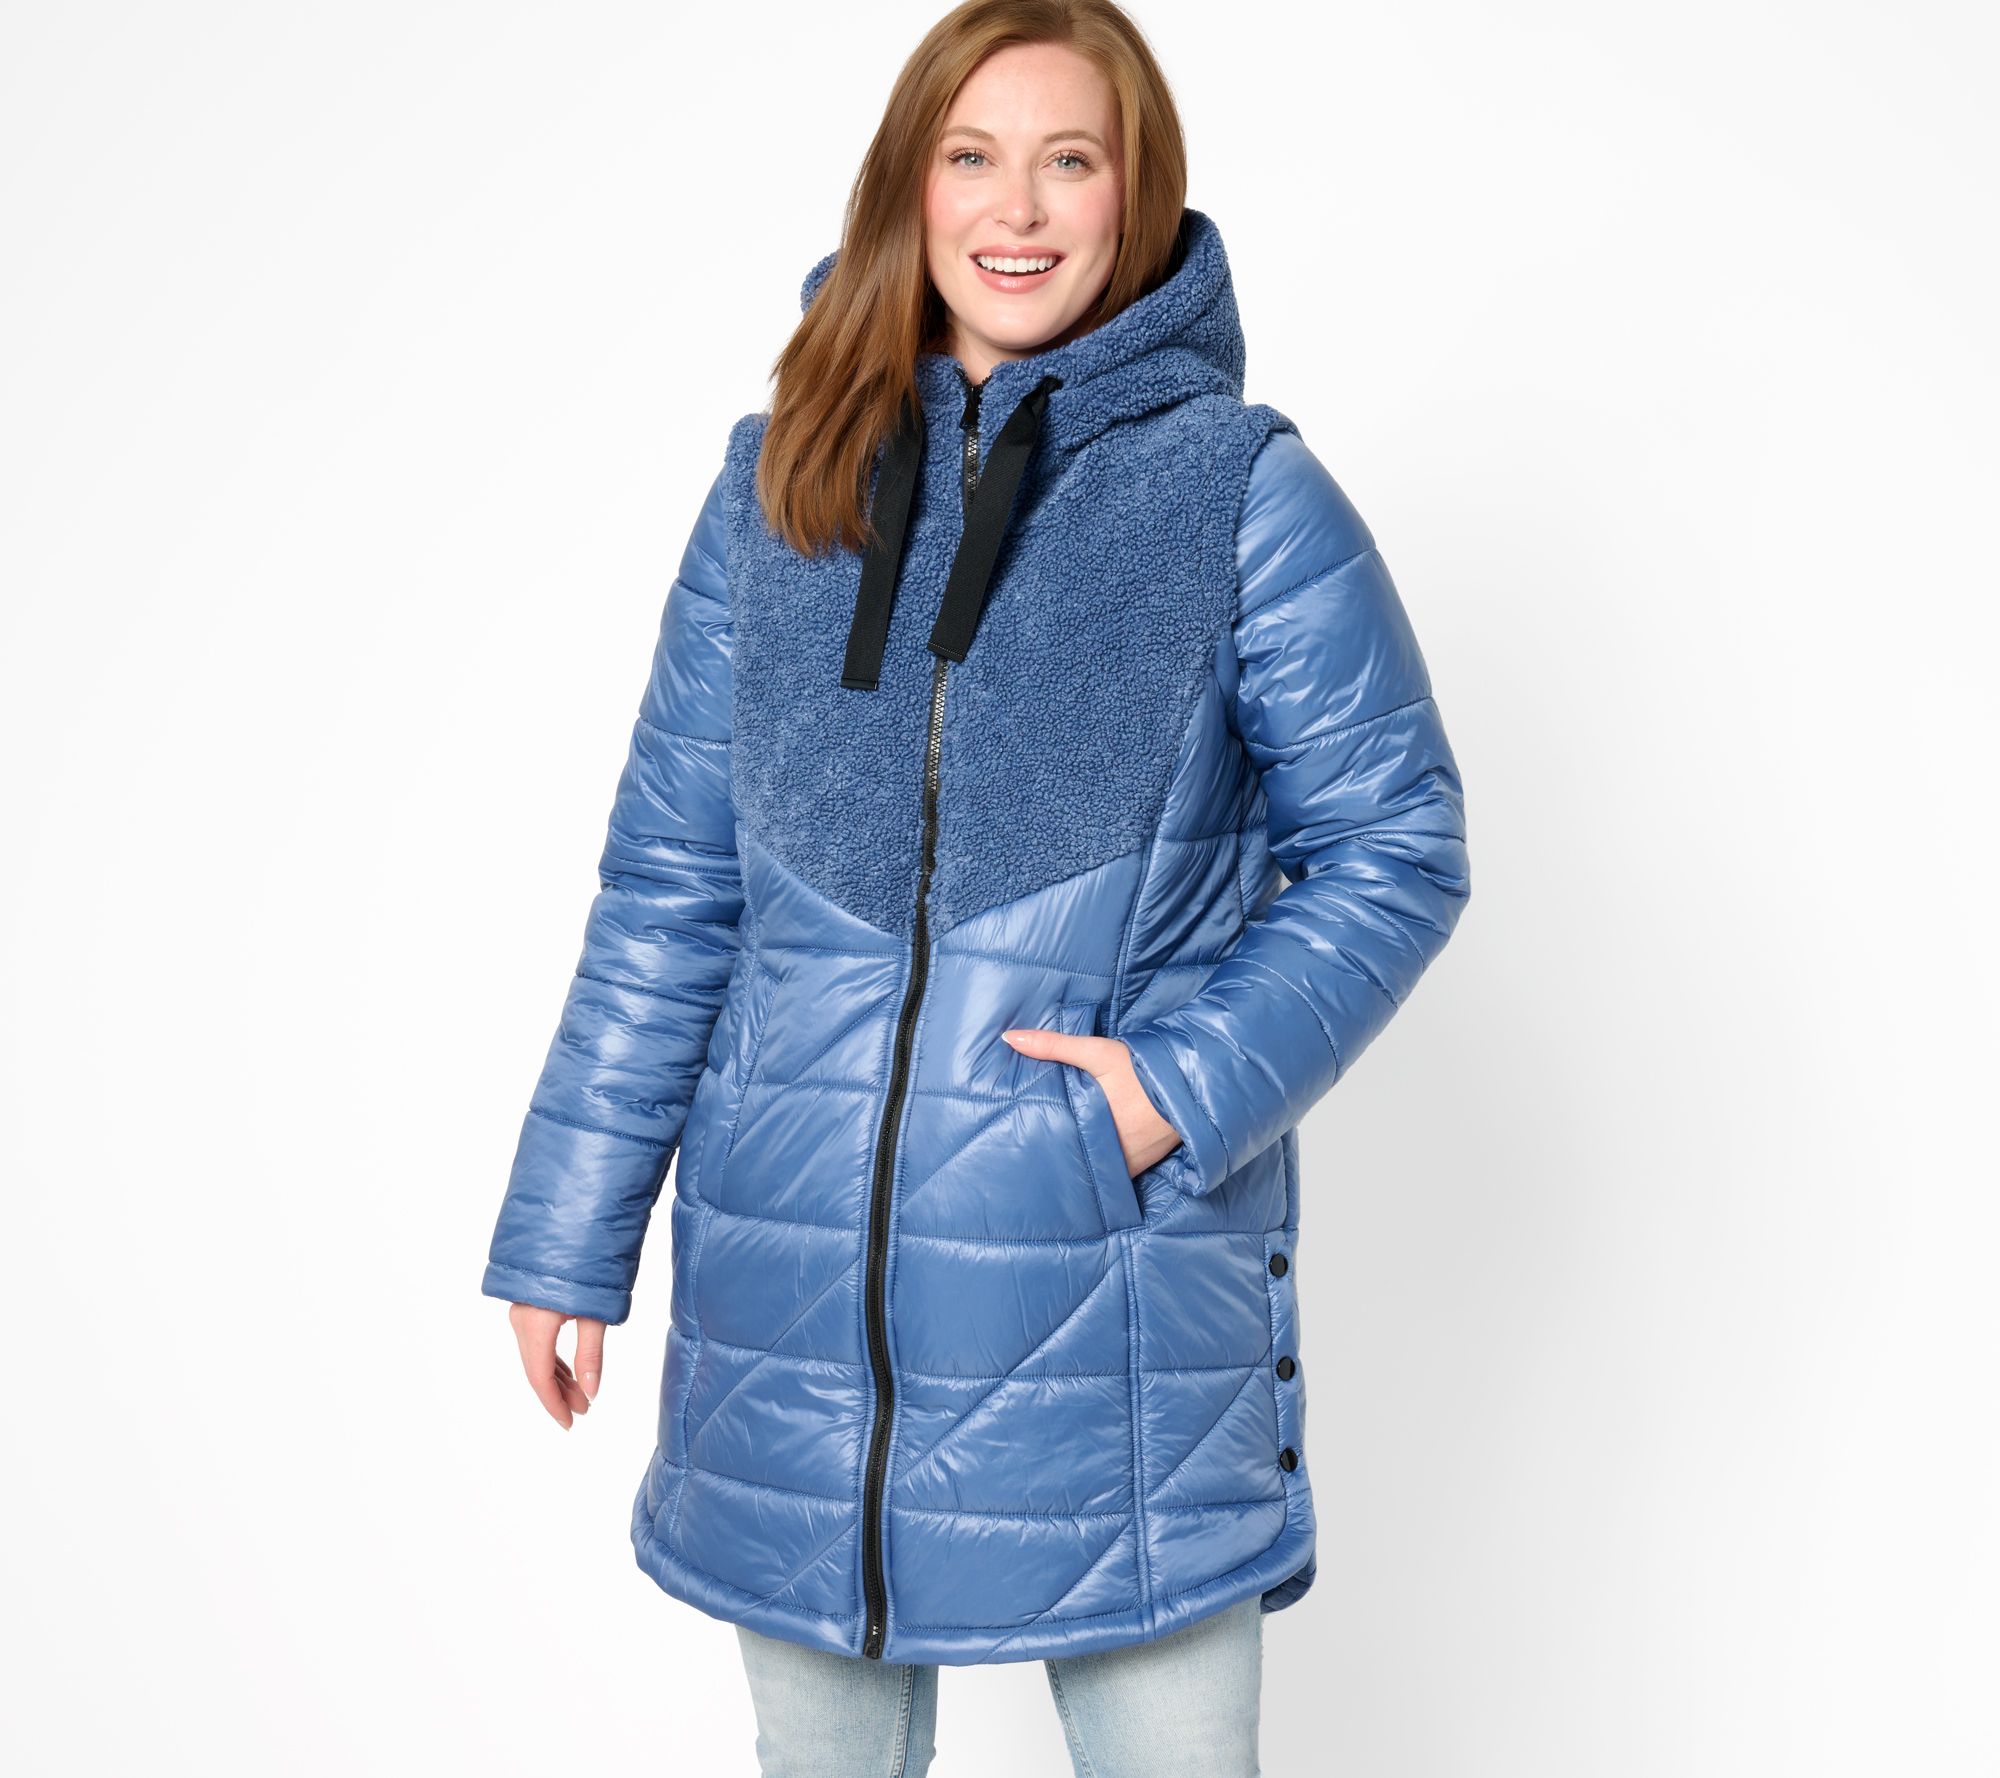 LOGO by Lori Goldstein Puffer Coat with Removable Sleeves - QVC.com